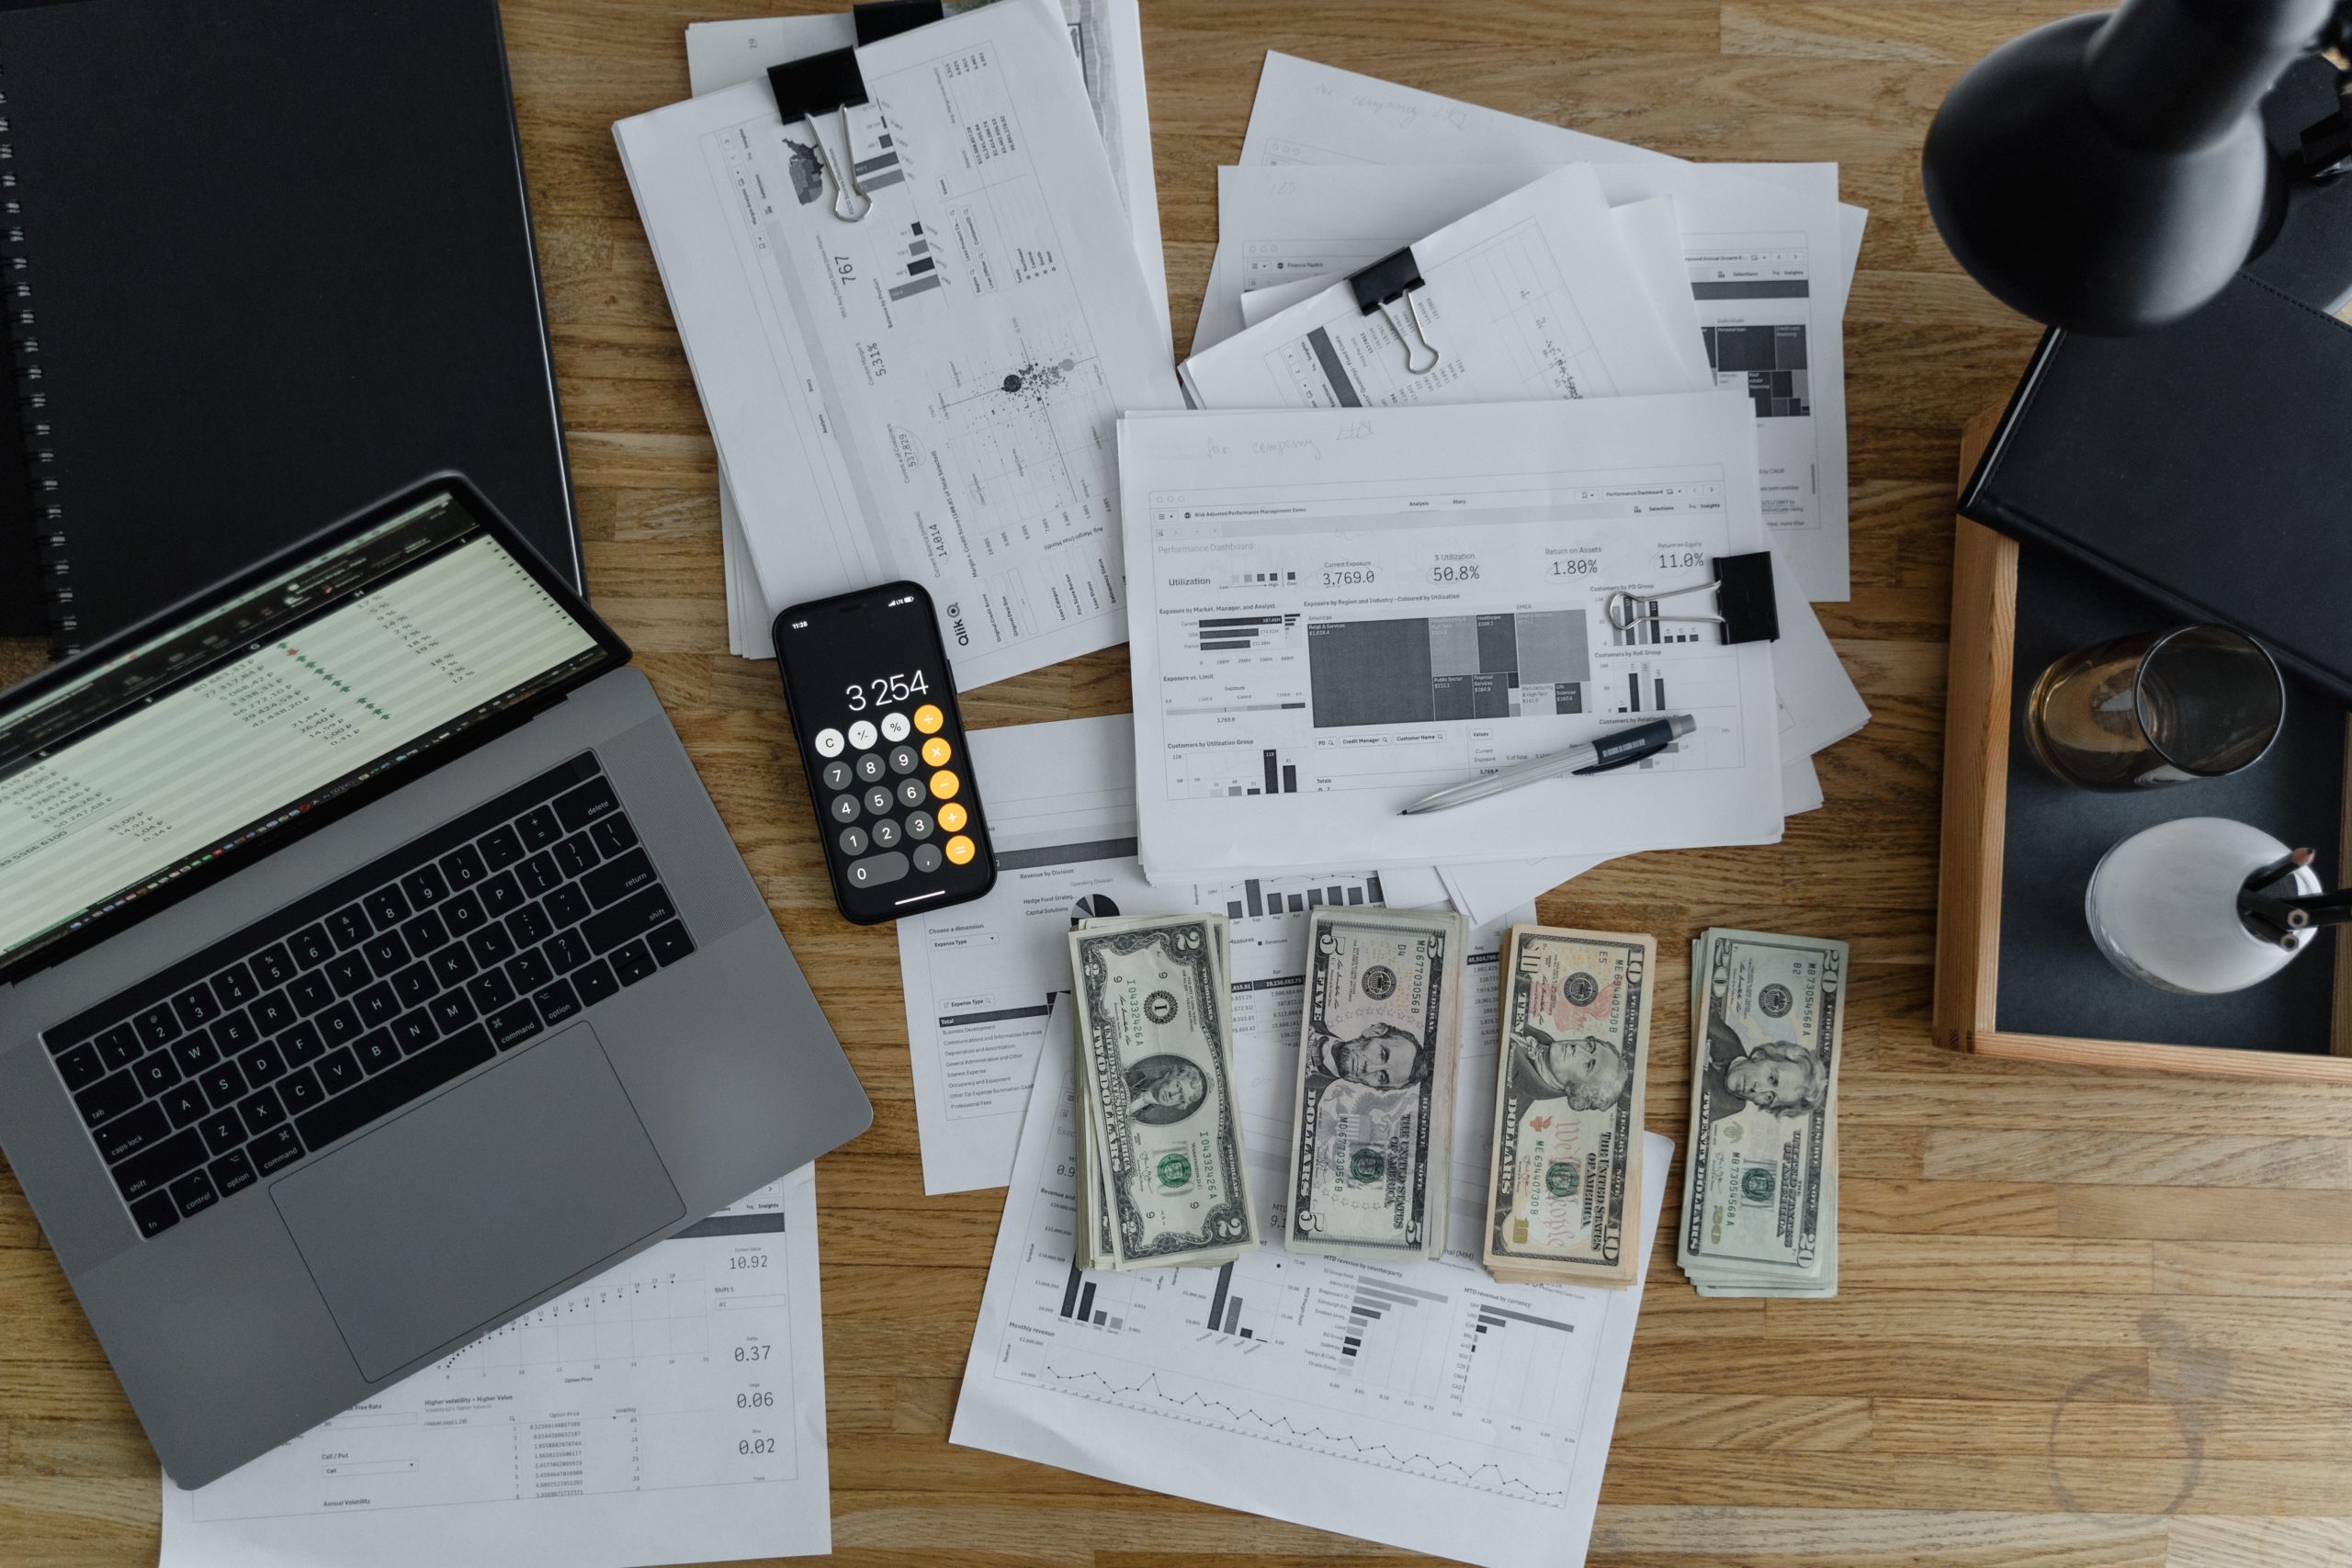 Dollar bills, an iPhone and a laptop on an office table next to piles of paper printed with graphs.